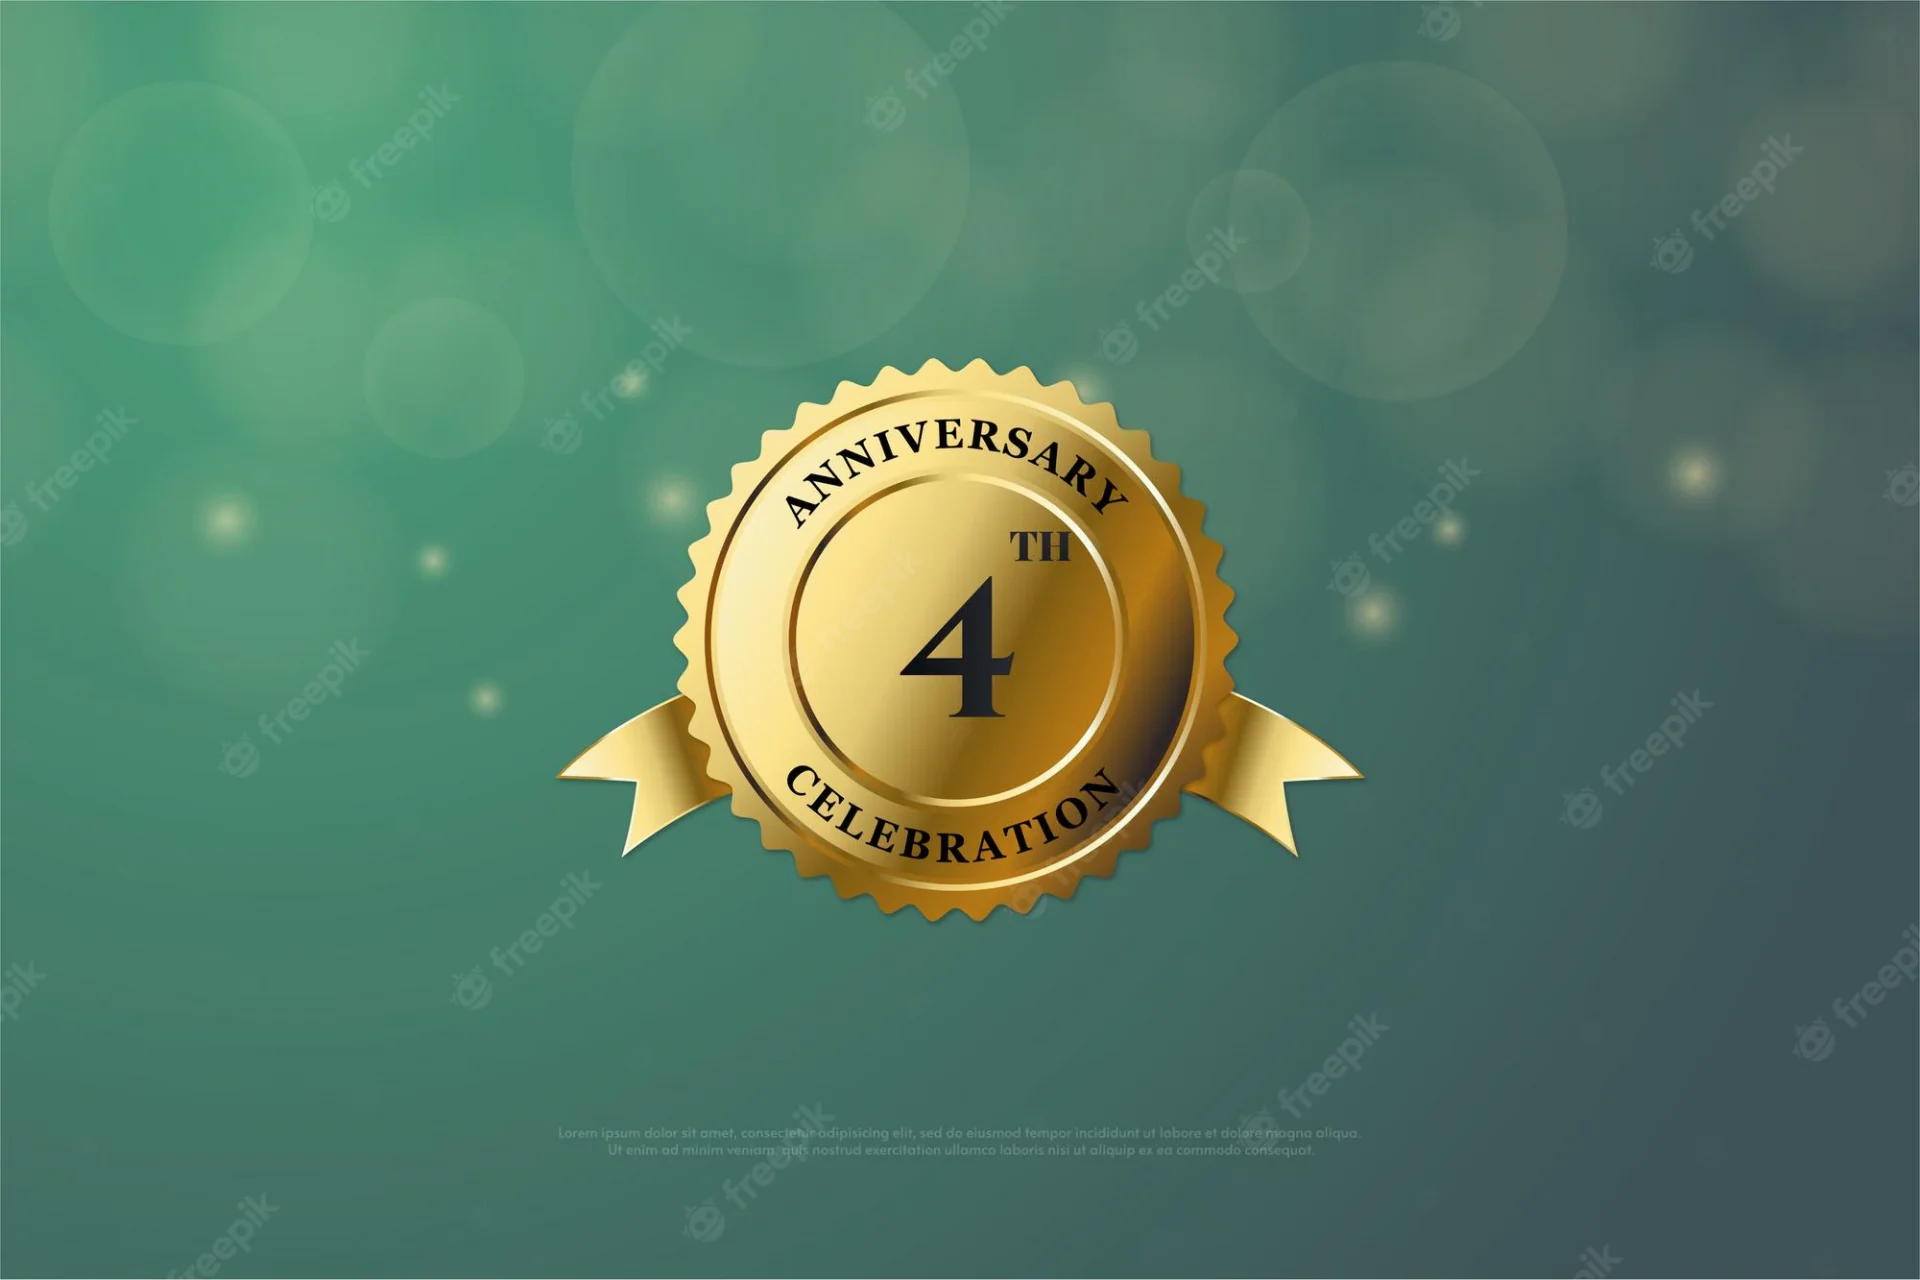 4TH Medals Anniversary